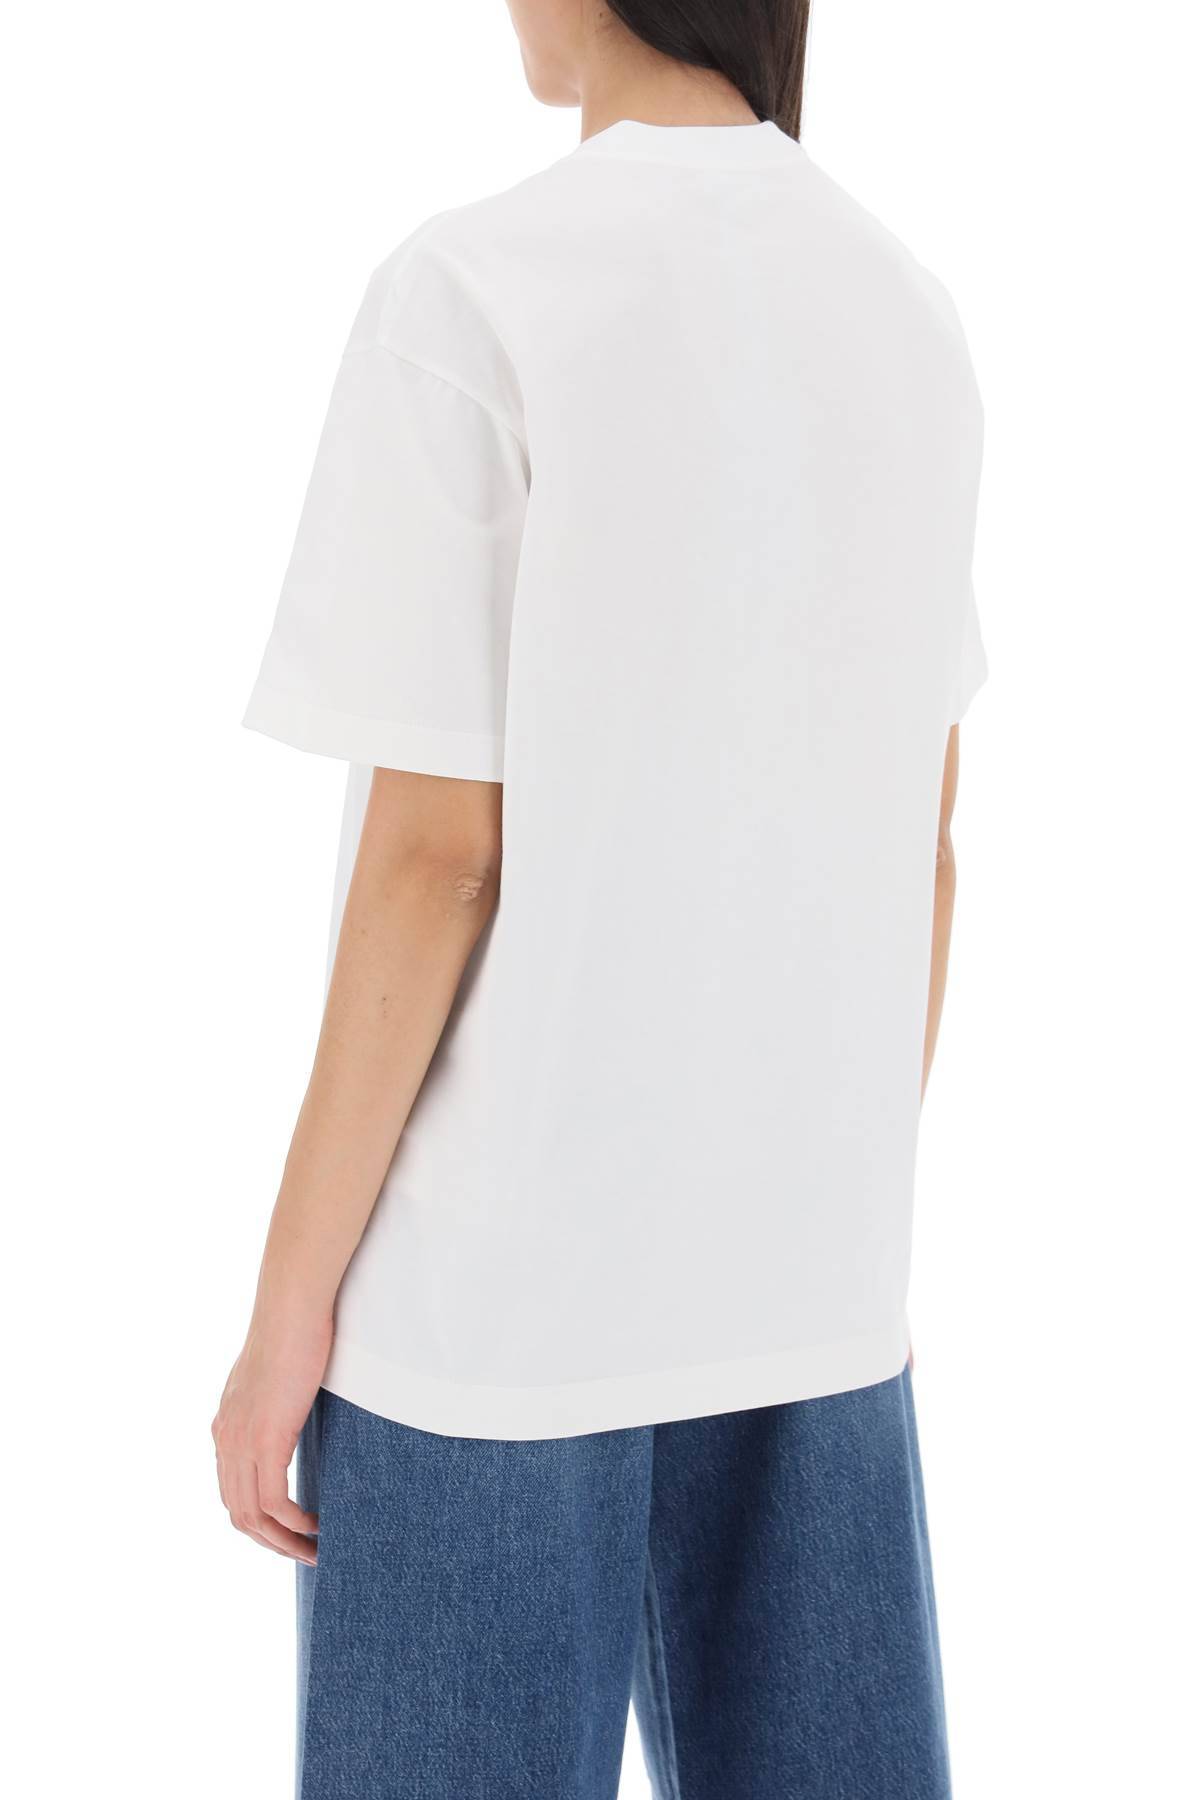 Shop Etro Floral Pegasus Embroidered T-shirt In White